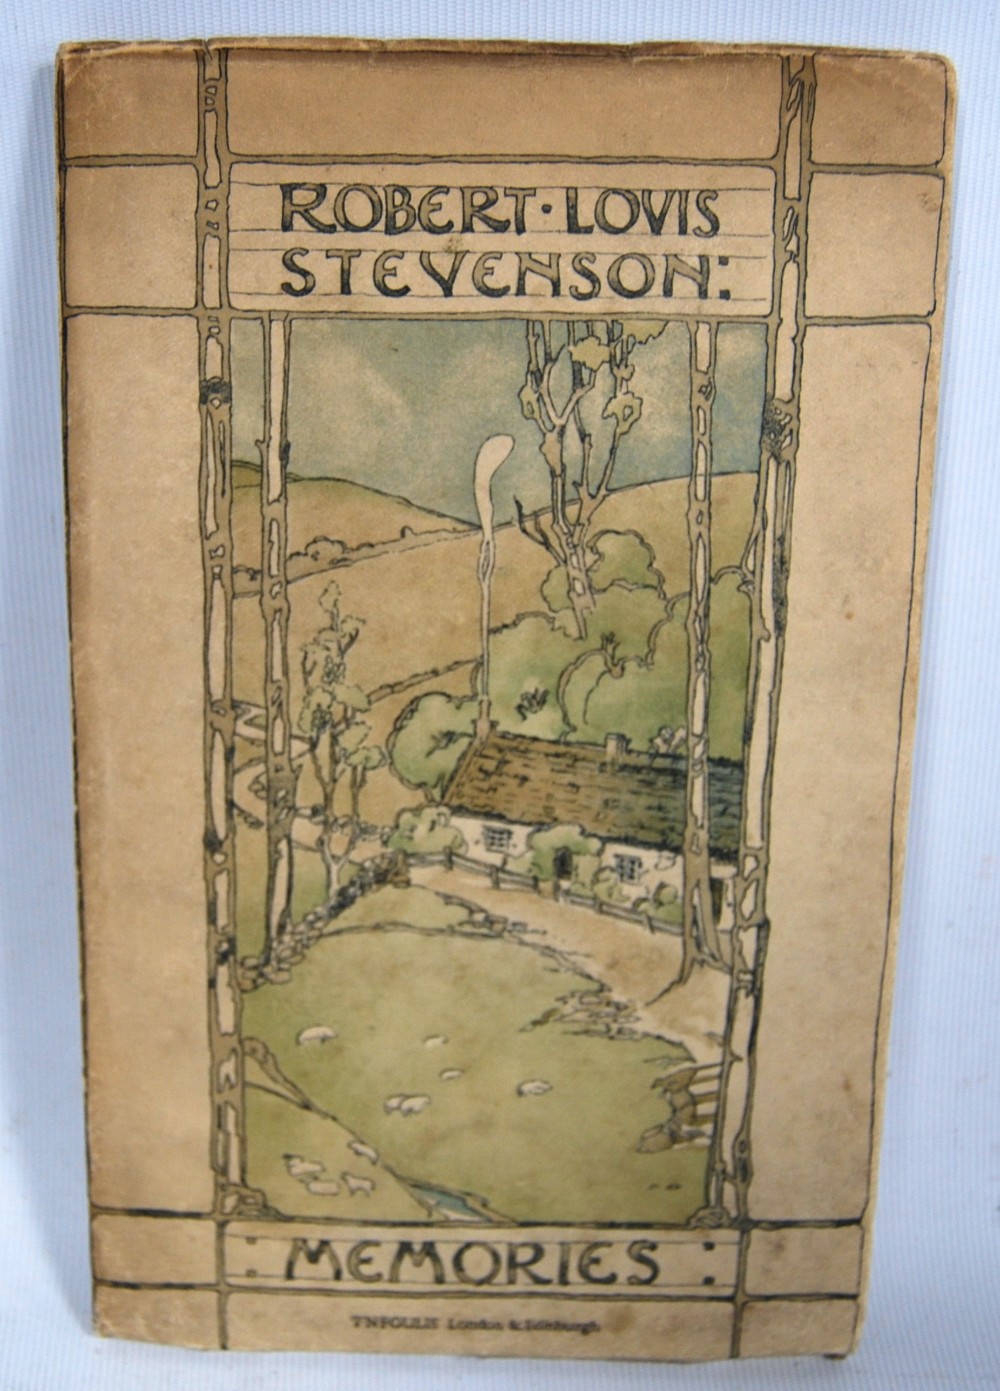 Robert Louis Stevenson, Memories, published by Foulis, cover illustrated by Jessie Marion King, - Image 2 of 11